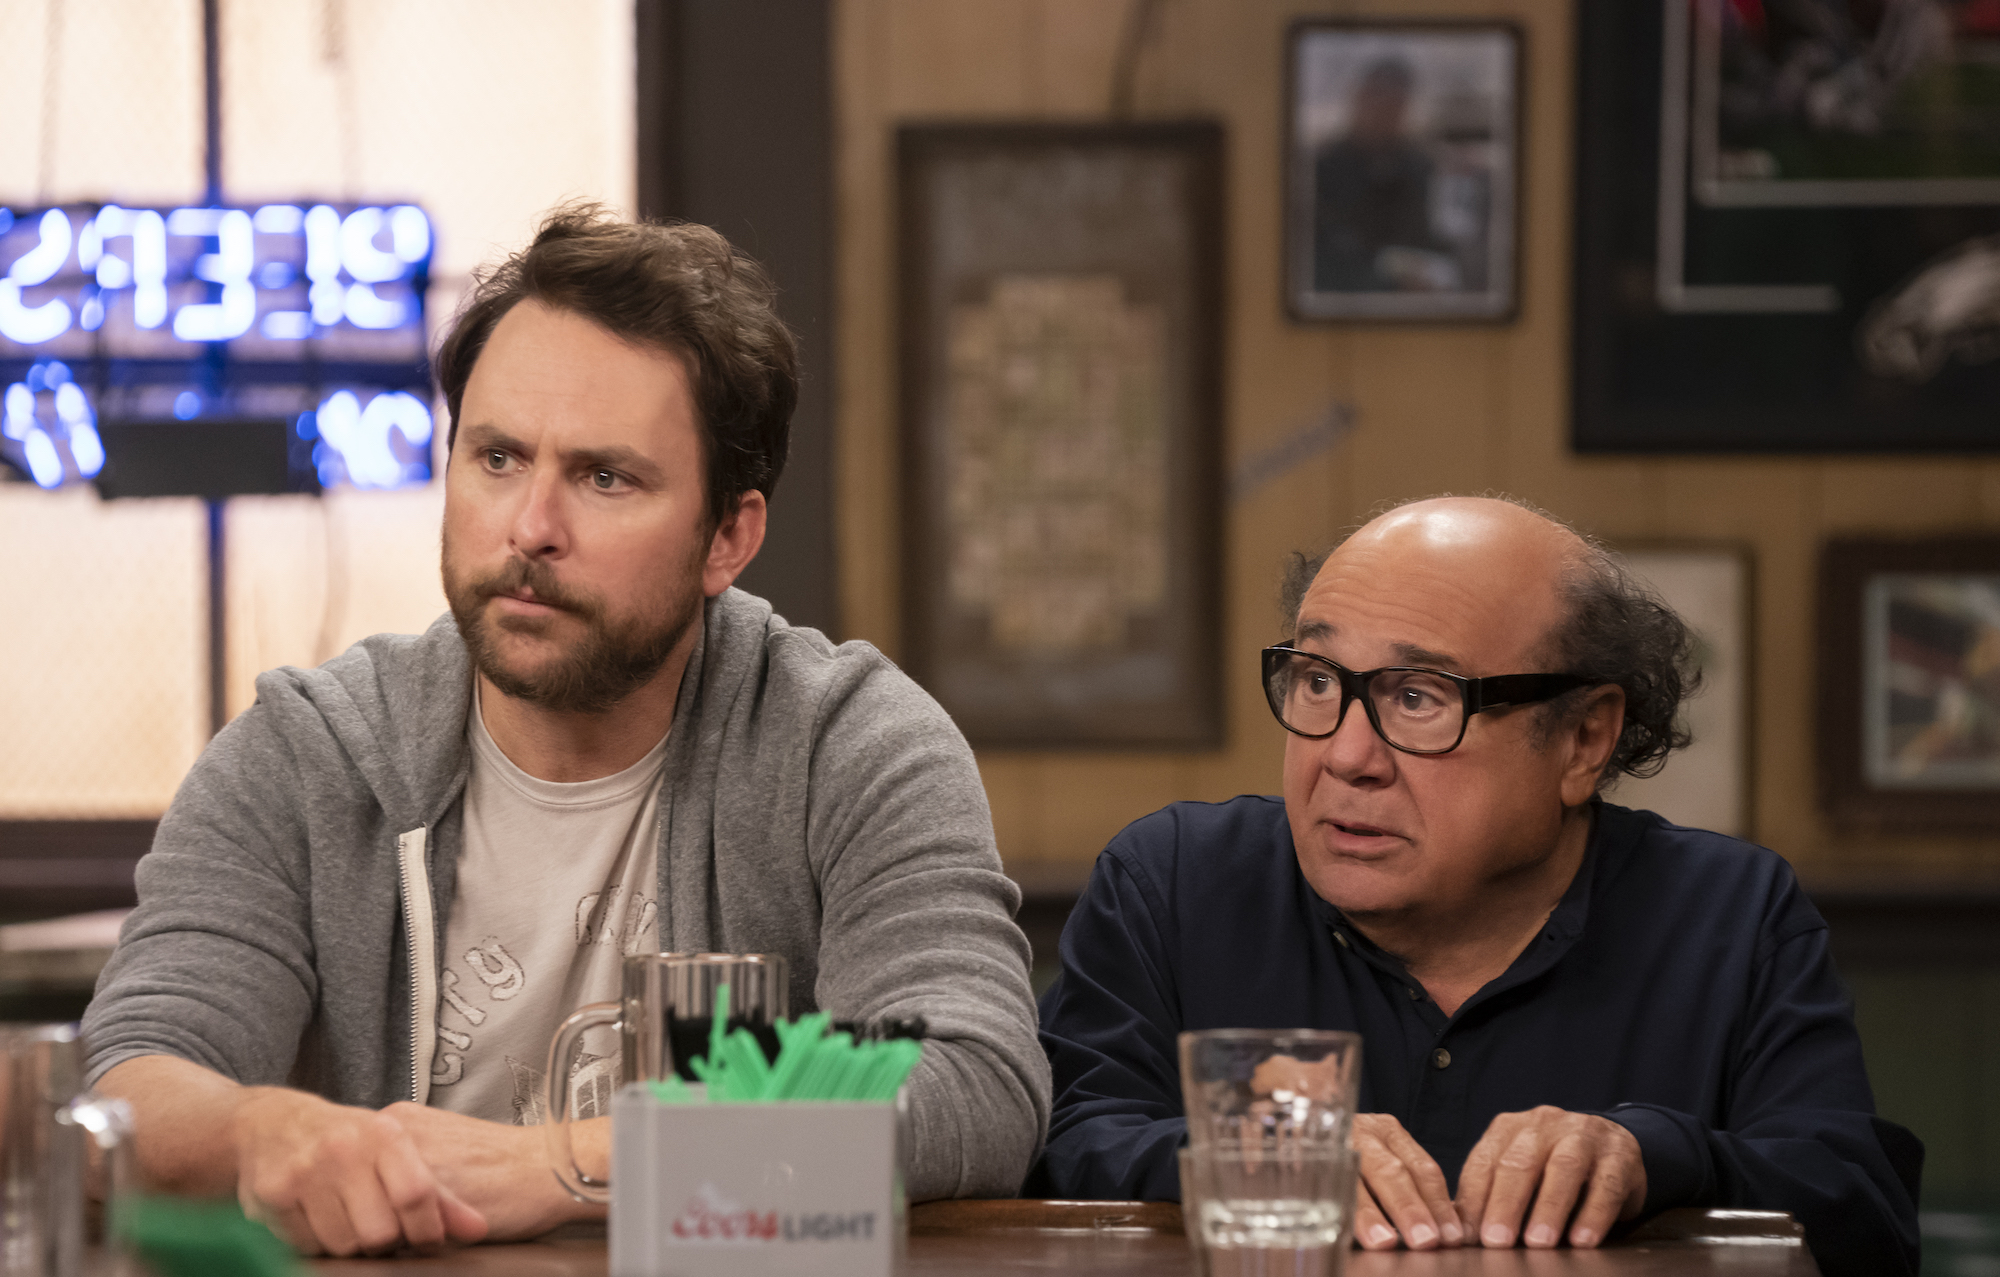 'It's Always Sunny in Philadelphia' Season 15: Charlie Day and Danny DeVito sit at the bar